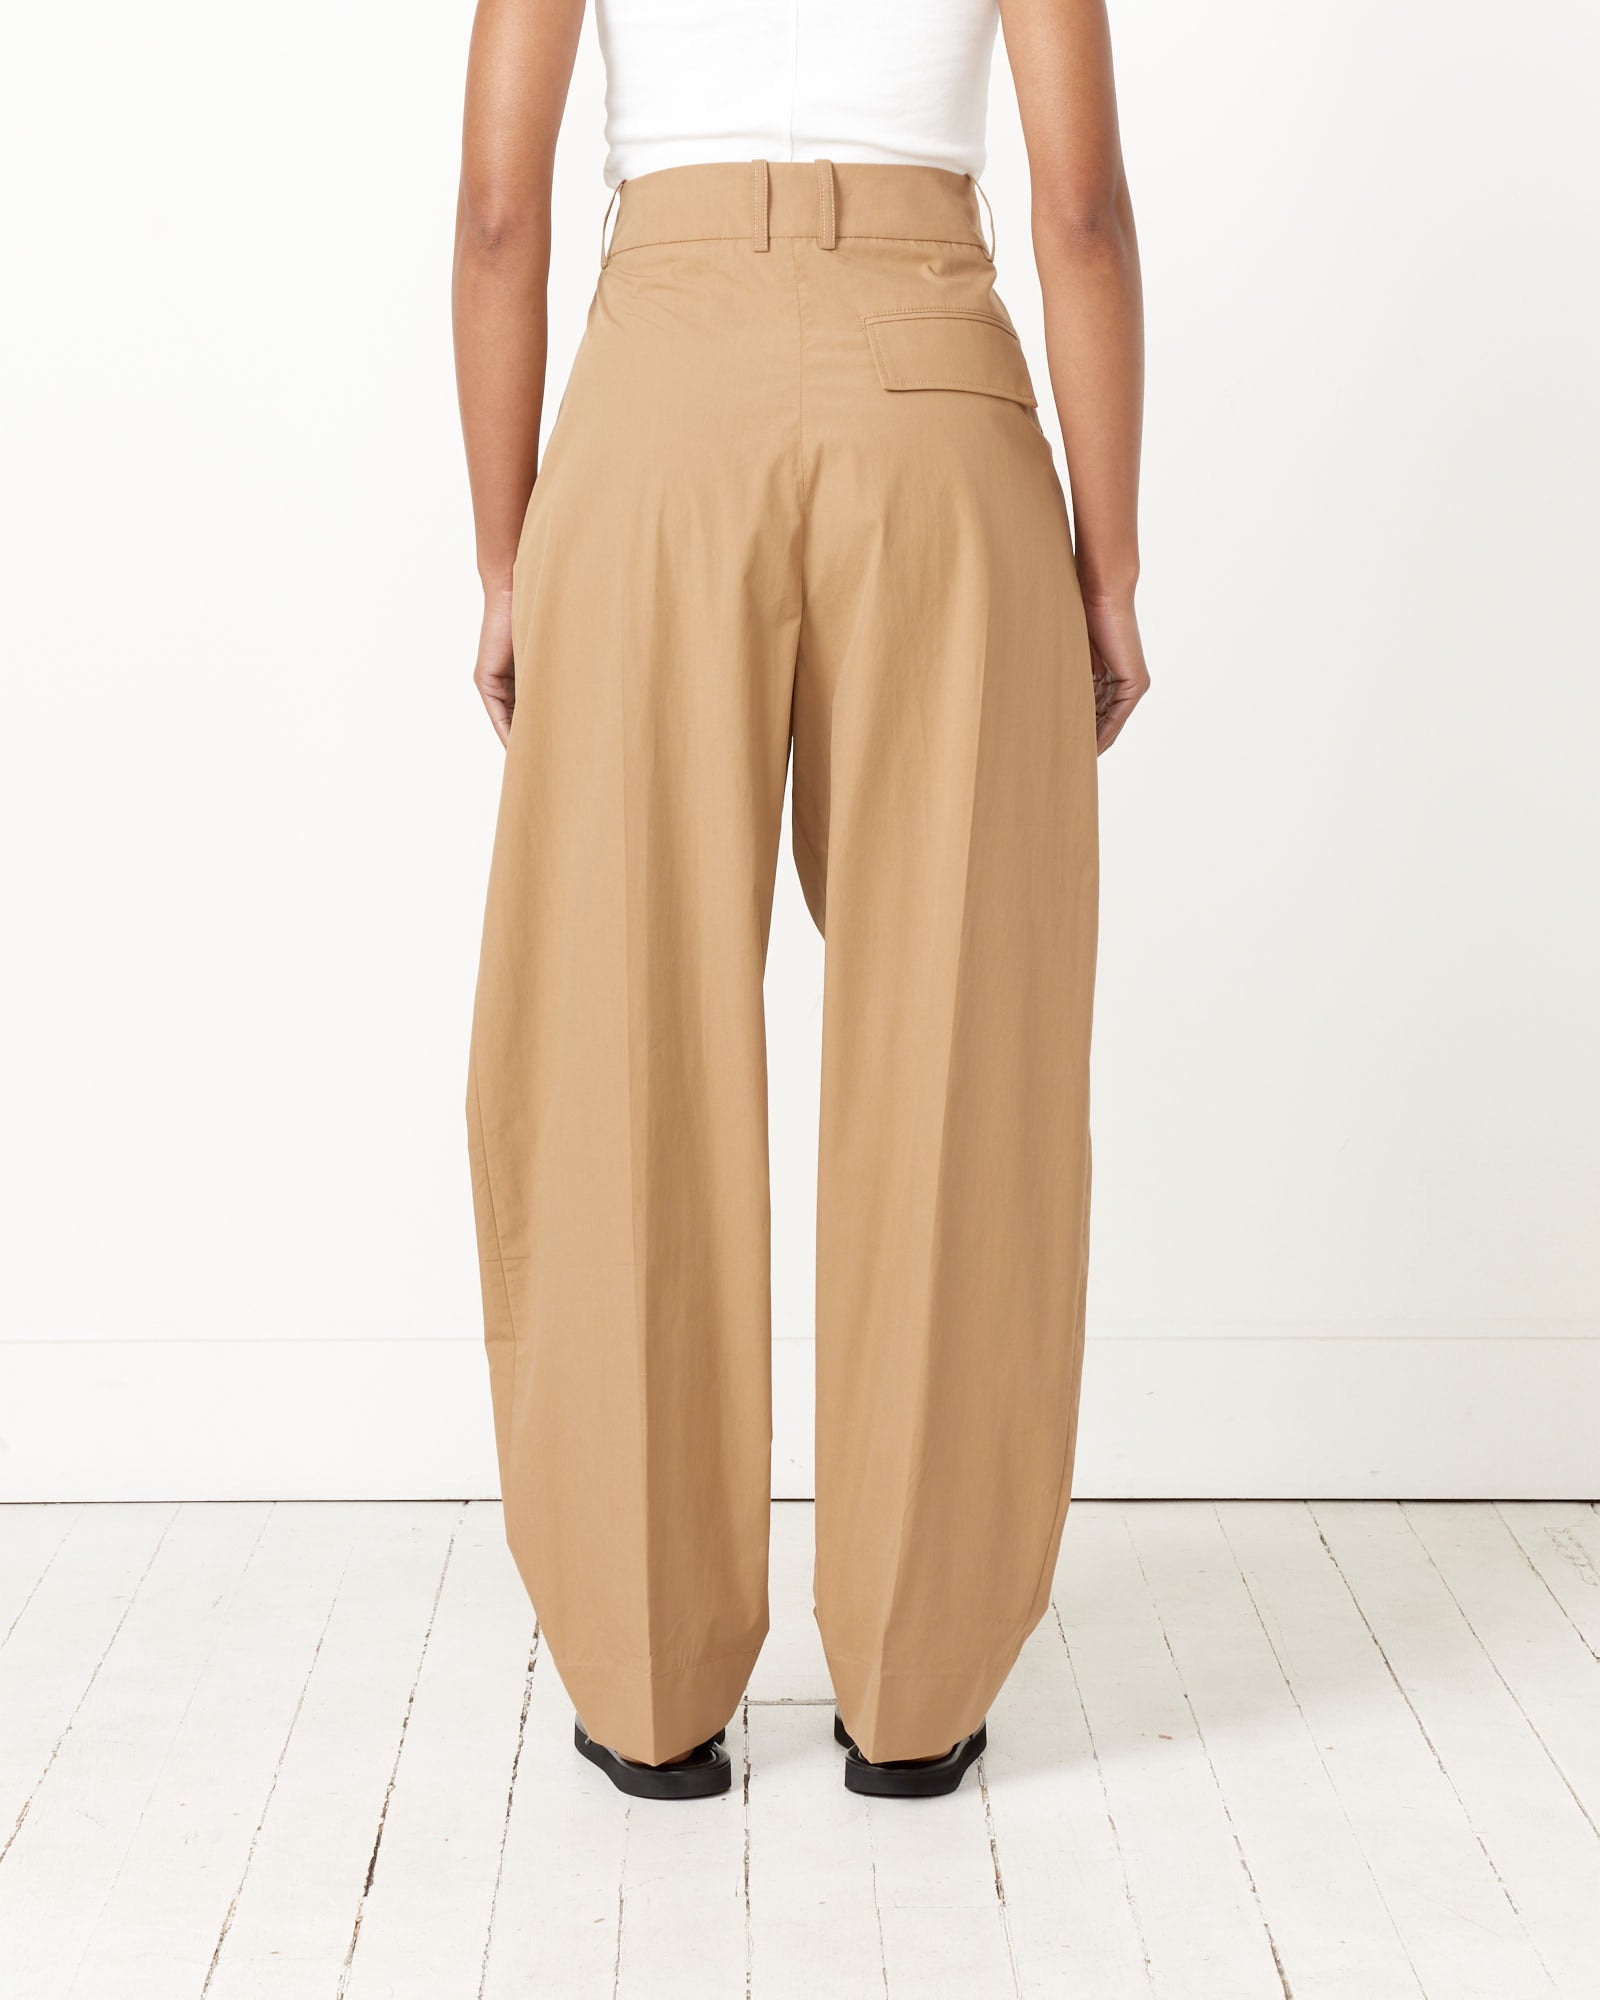 Acuna Pants in Sand